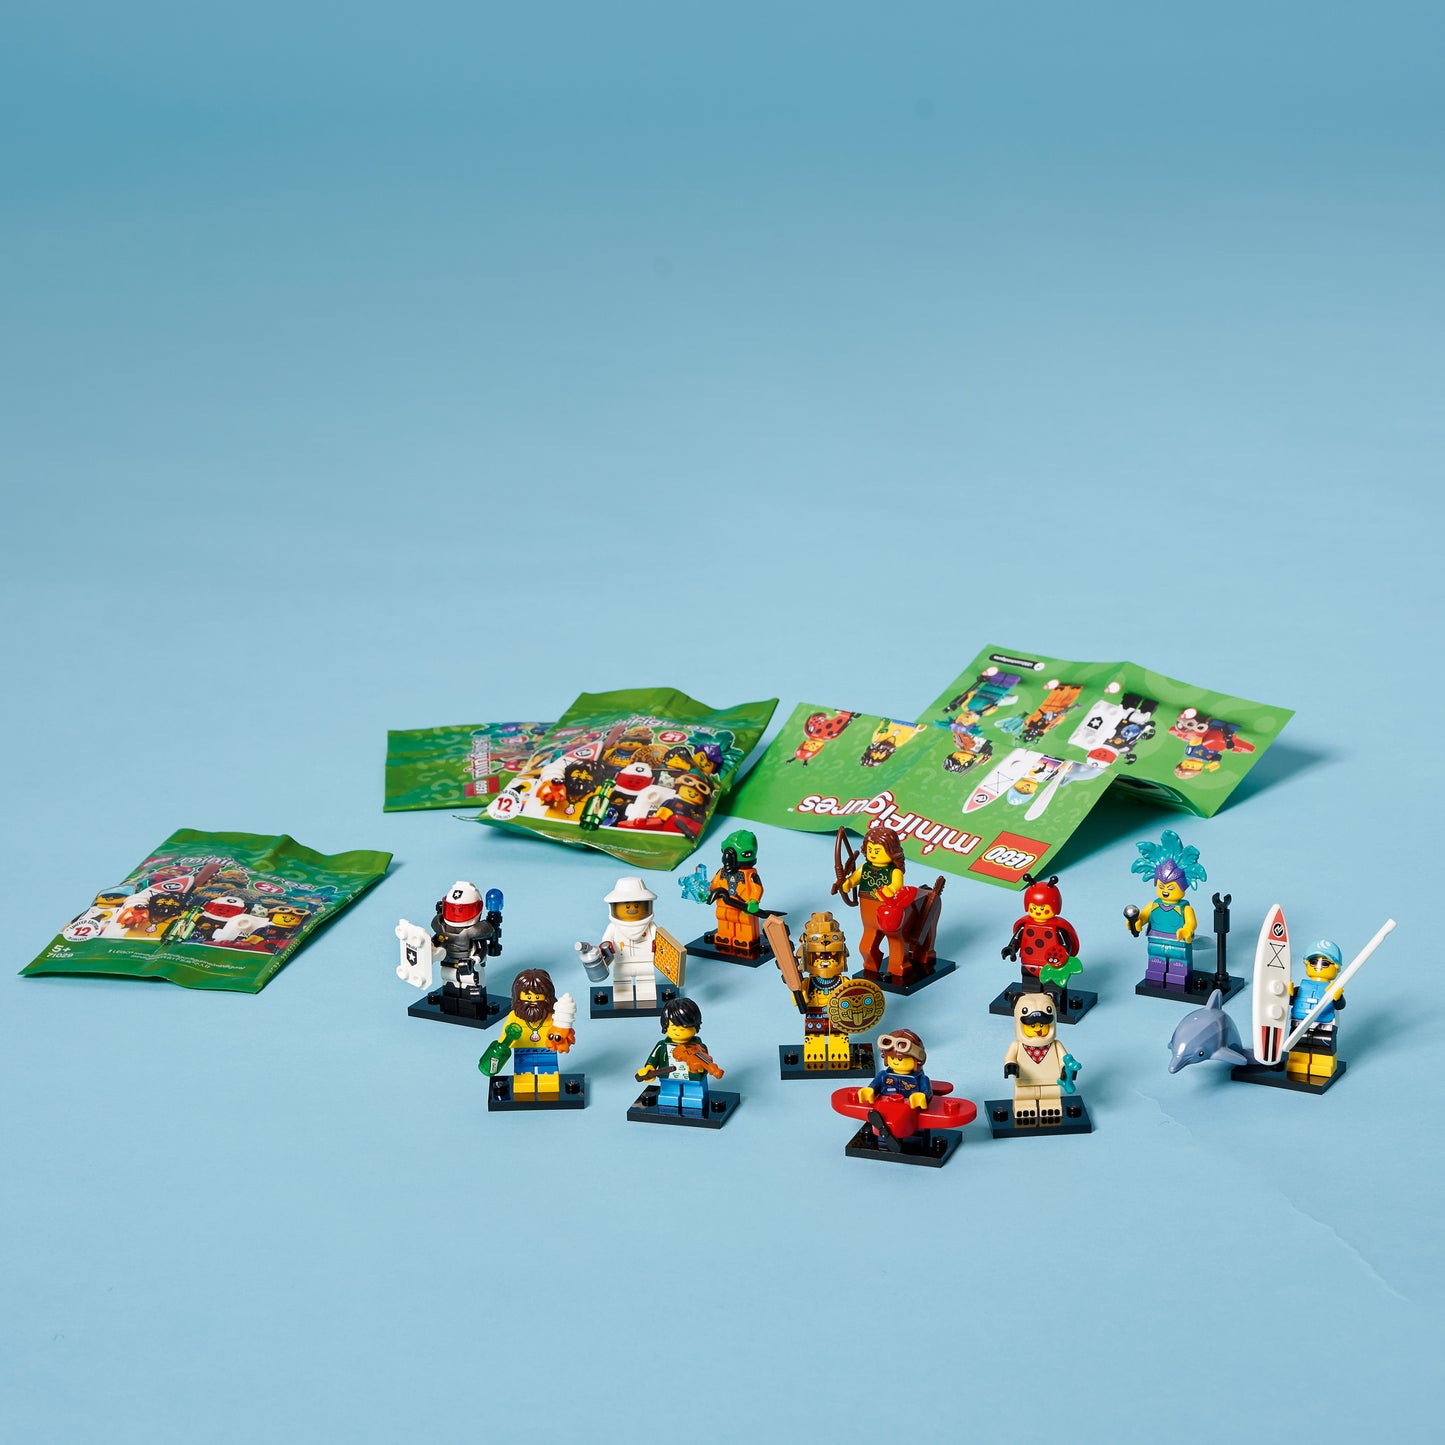 LEGO Minifigures Series 21 71029 Limited Edition Collectible Building Kit (1 of 12 to Collect)